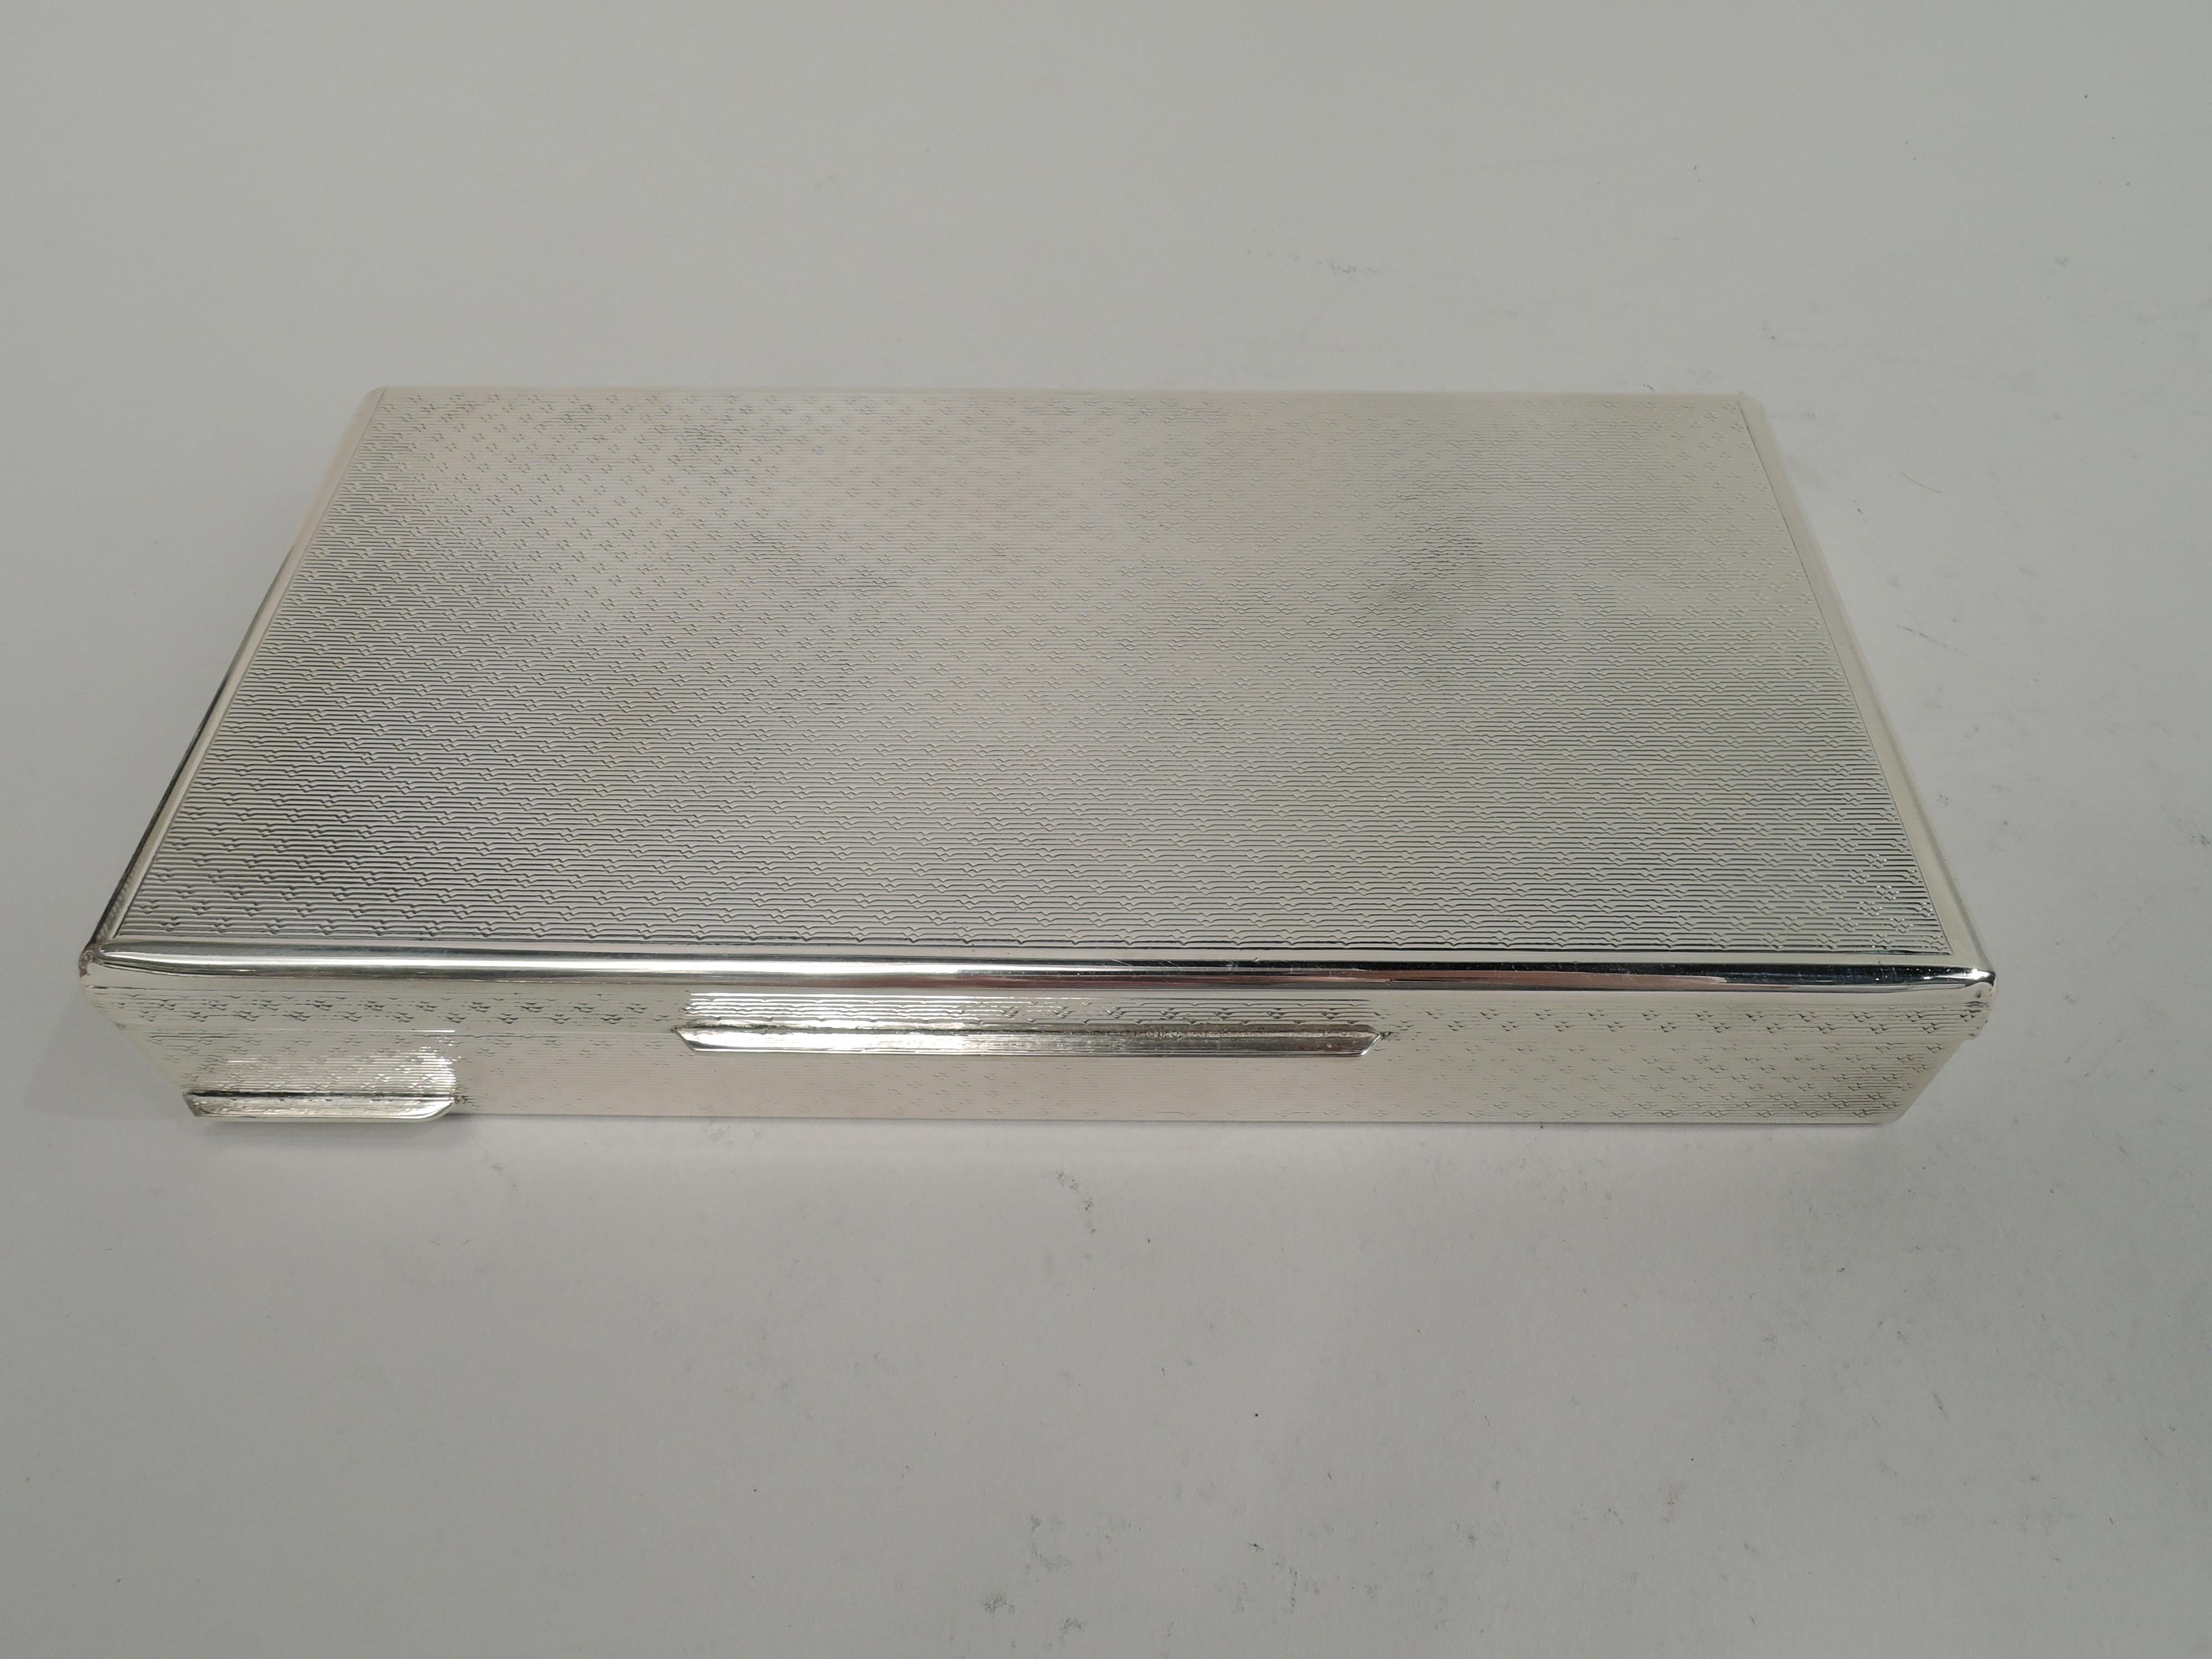 Italian Mid-Century Modern 800 silver box. Rectangular with straight sides and thumb rest. Cover flat and hinged with tab. Allover engine-turned curvilinear ornament in plain borders on sides and cover top. Box underside plain. Marked “800” and